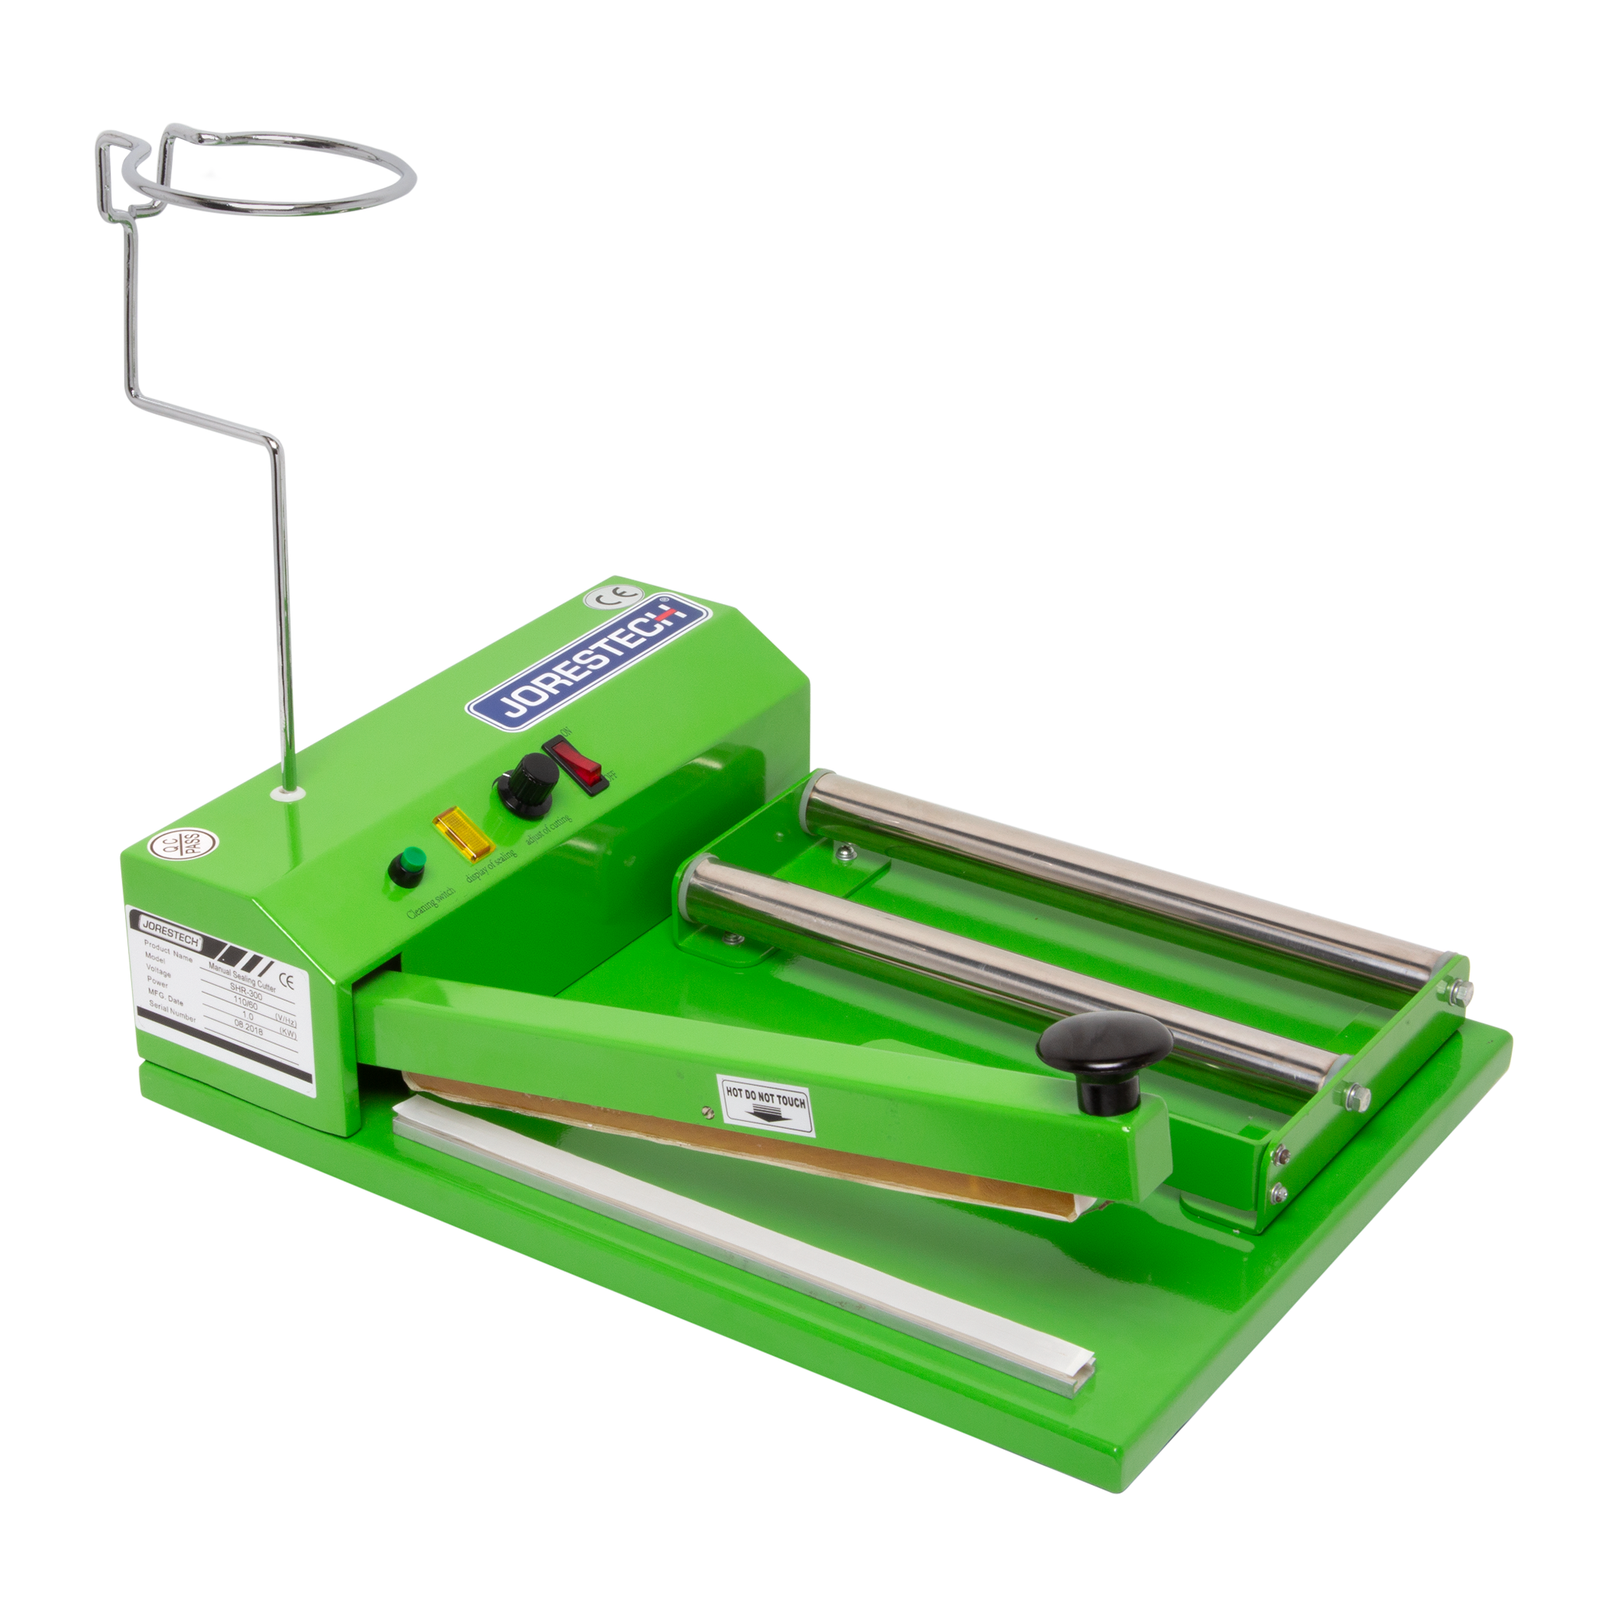  JORES TECHNOLOGIES®  12 inch shrink film sealing system with a shrink roll dispenser, impulse sealer, and heat gun receptacle.